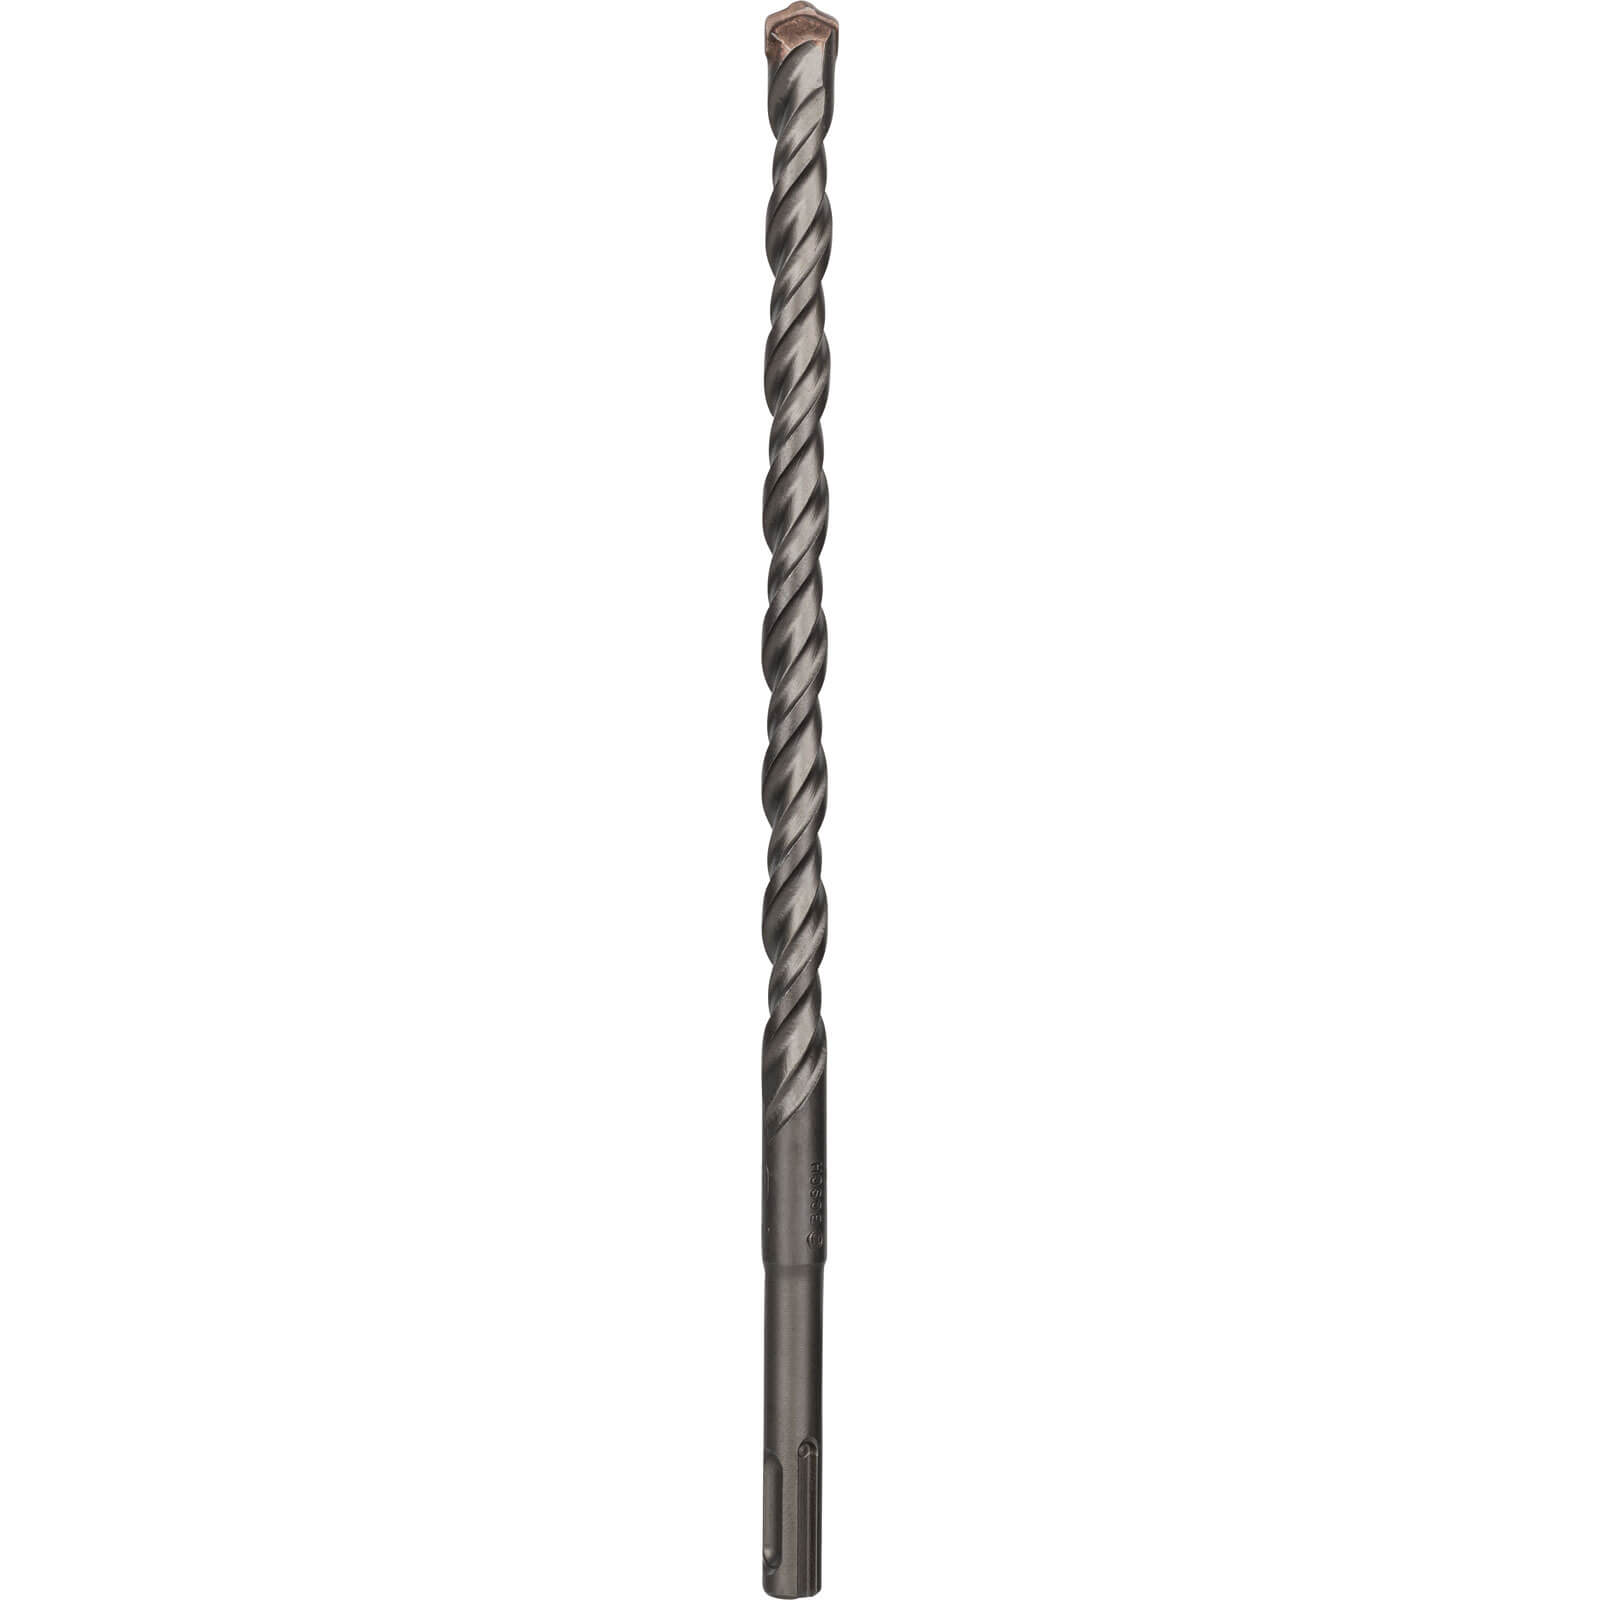 Image of Bosch Series 3 SDS Plus Masonry Drill Bit 12mm 260mm Pack of 10